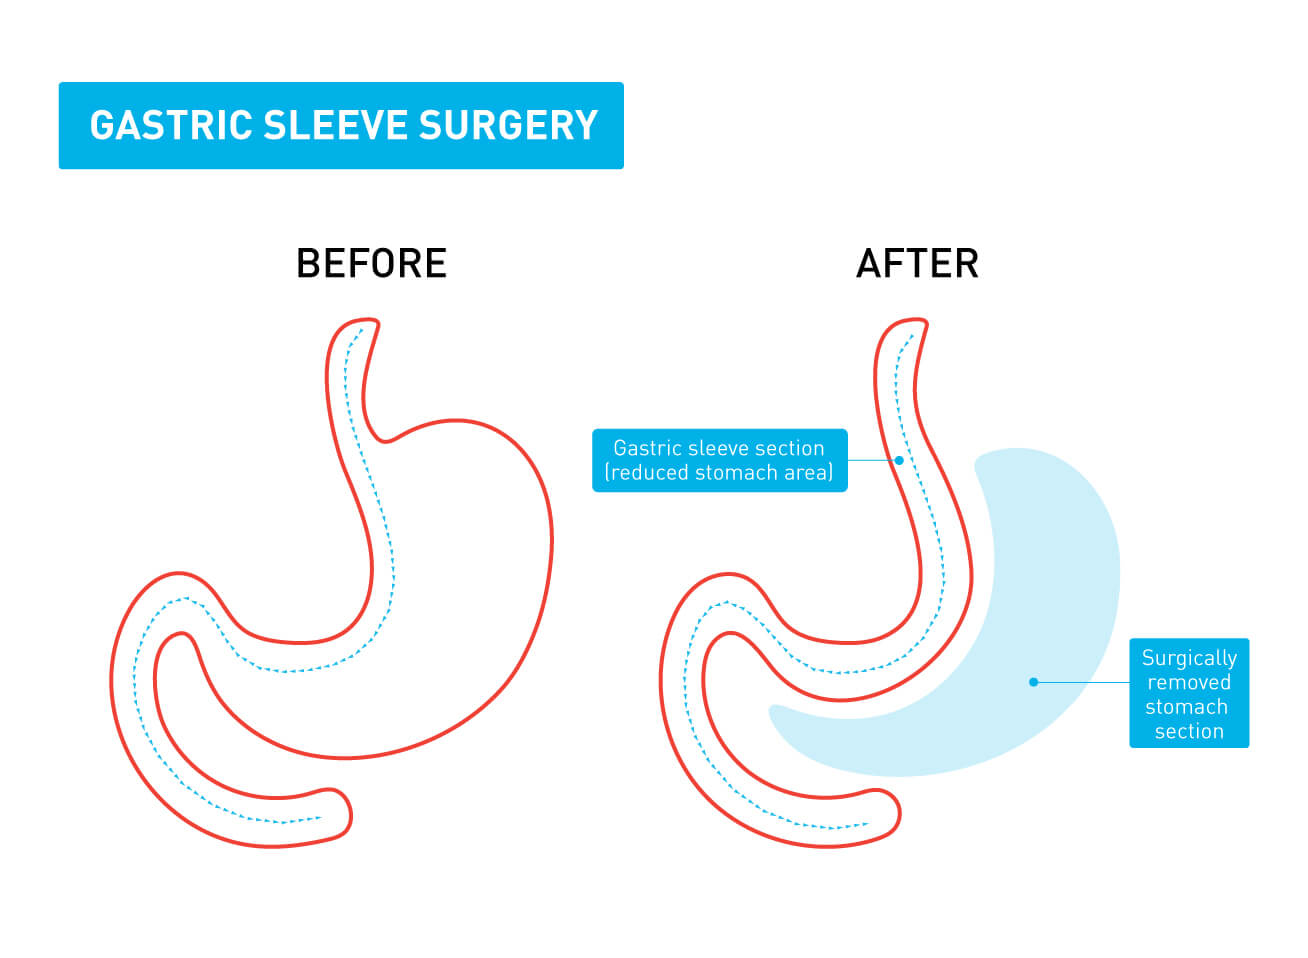 A graphic showing the difference between a stomach before and after gastric sleeve surgery